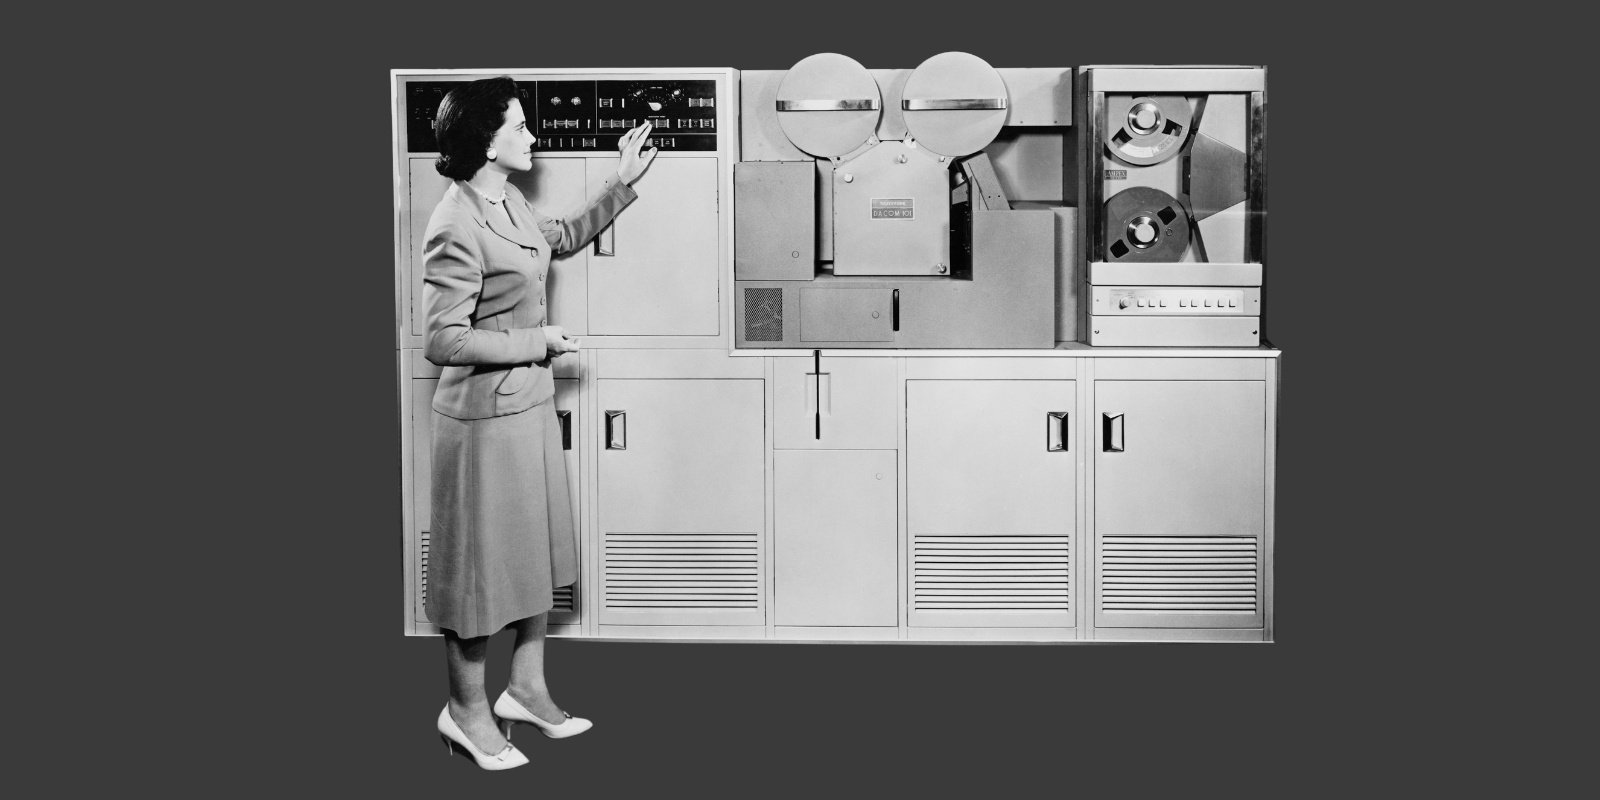 a female data scientist from the 1950s